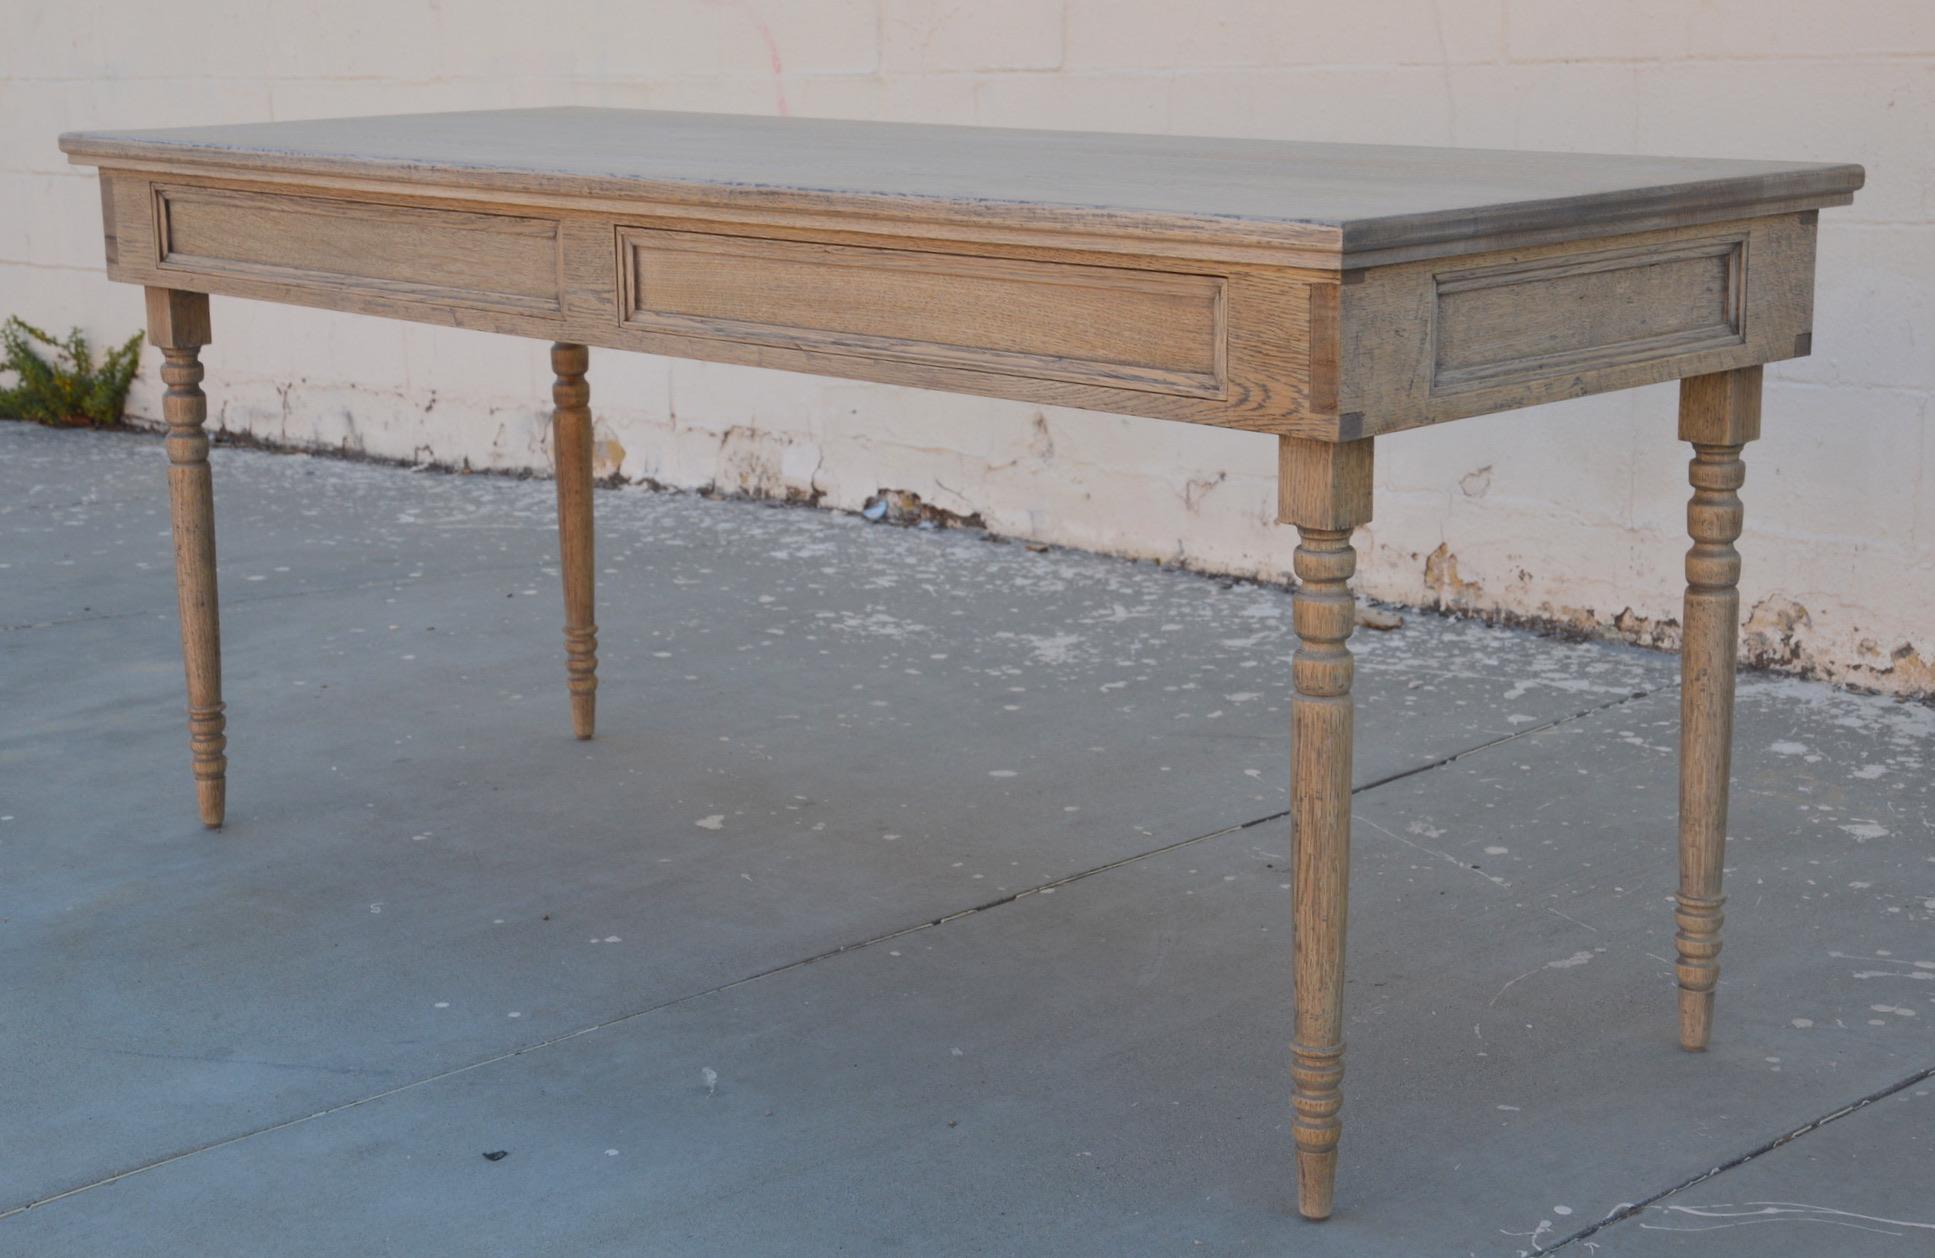 This rift sawn oak desk has turned legs and two drawers. It is seen here in 68